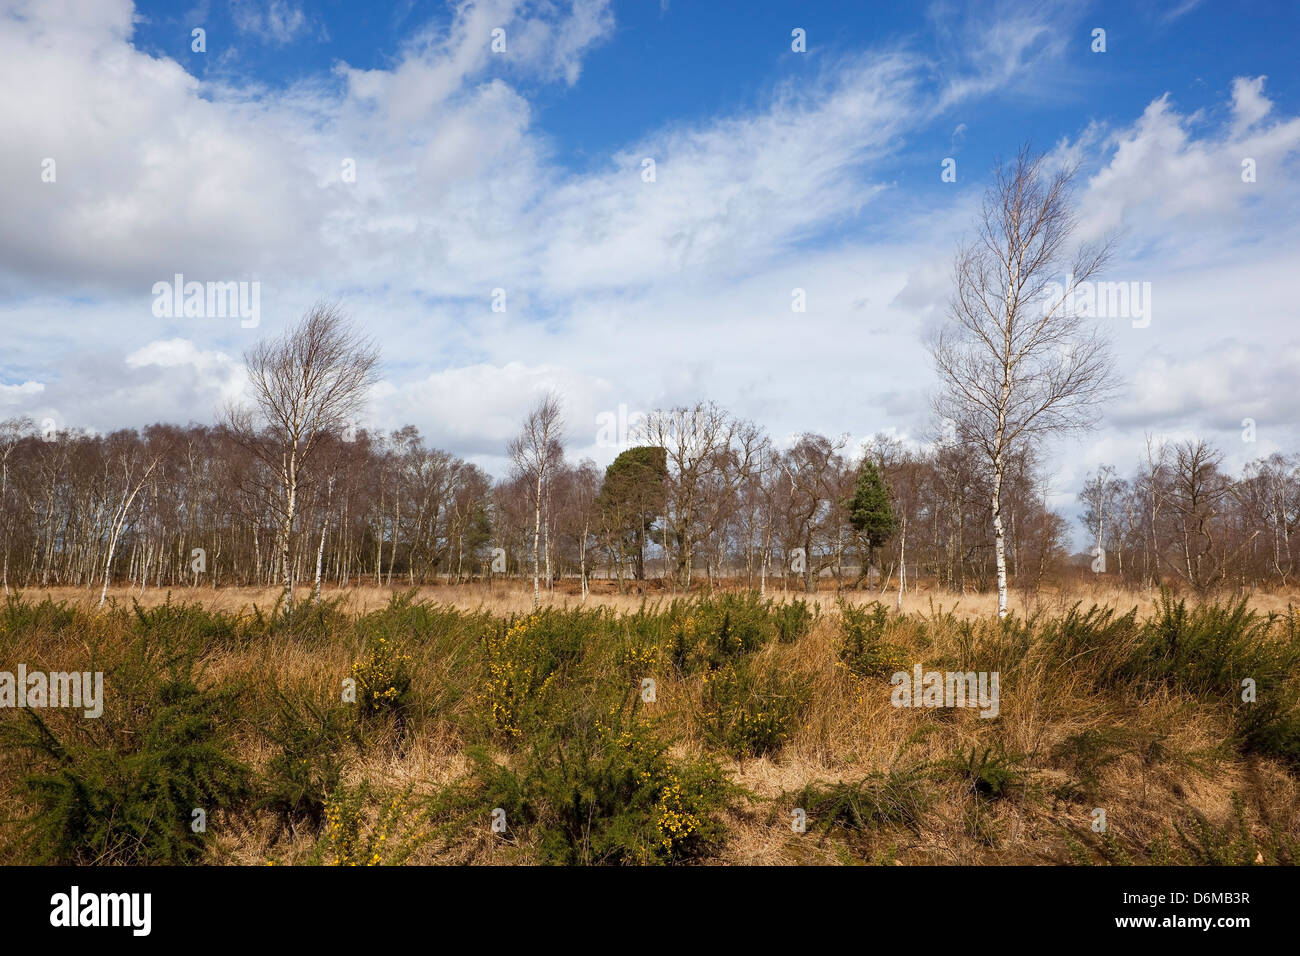 Birch trees and gorse bushes on a lowland heath in springtime under a blue cloudy sky Stock Photo